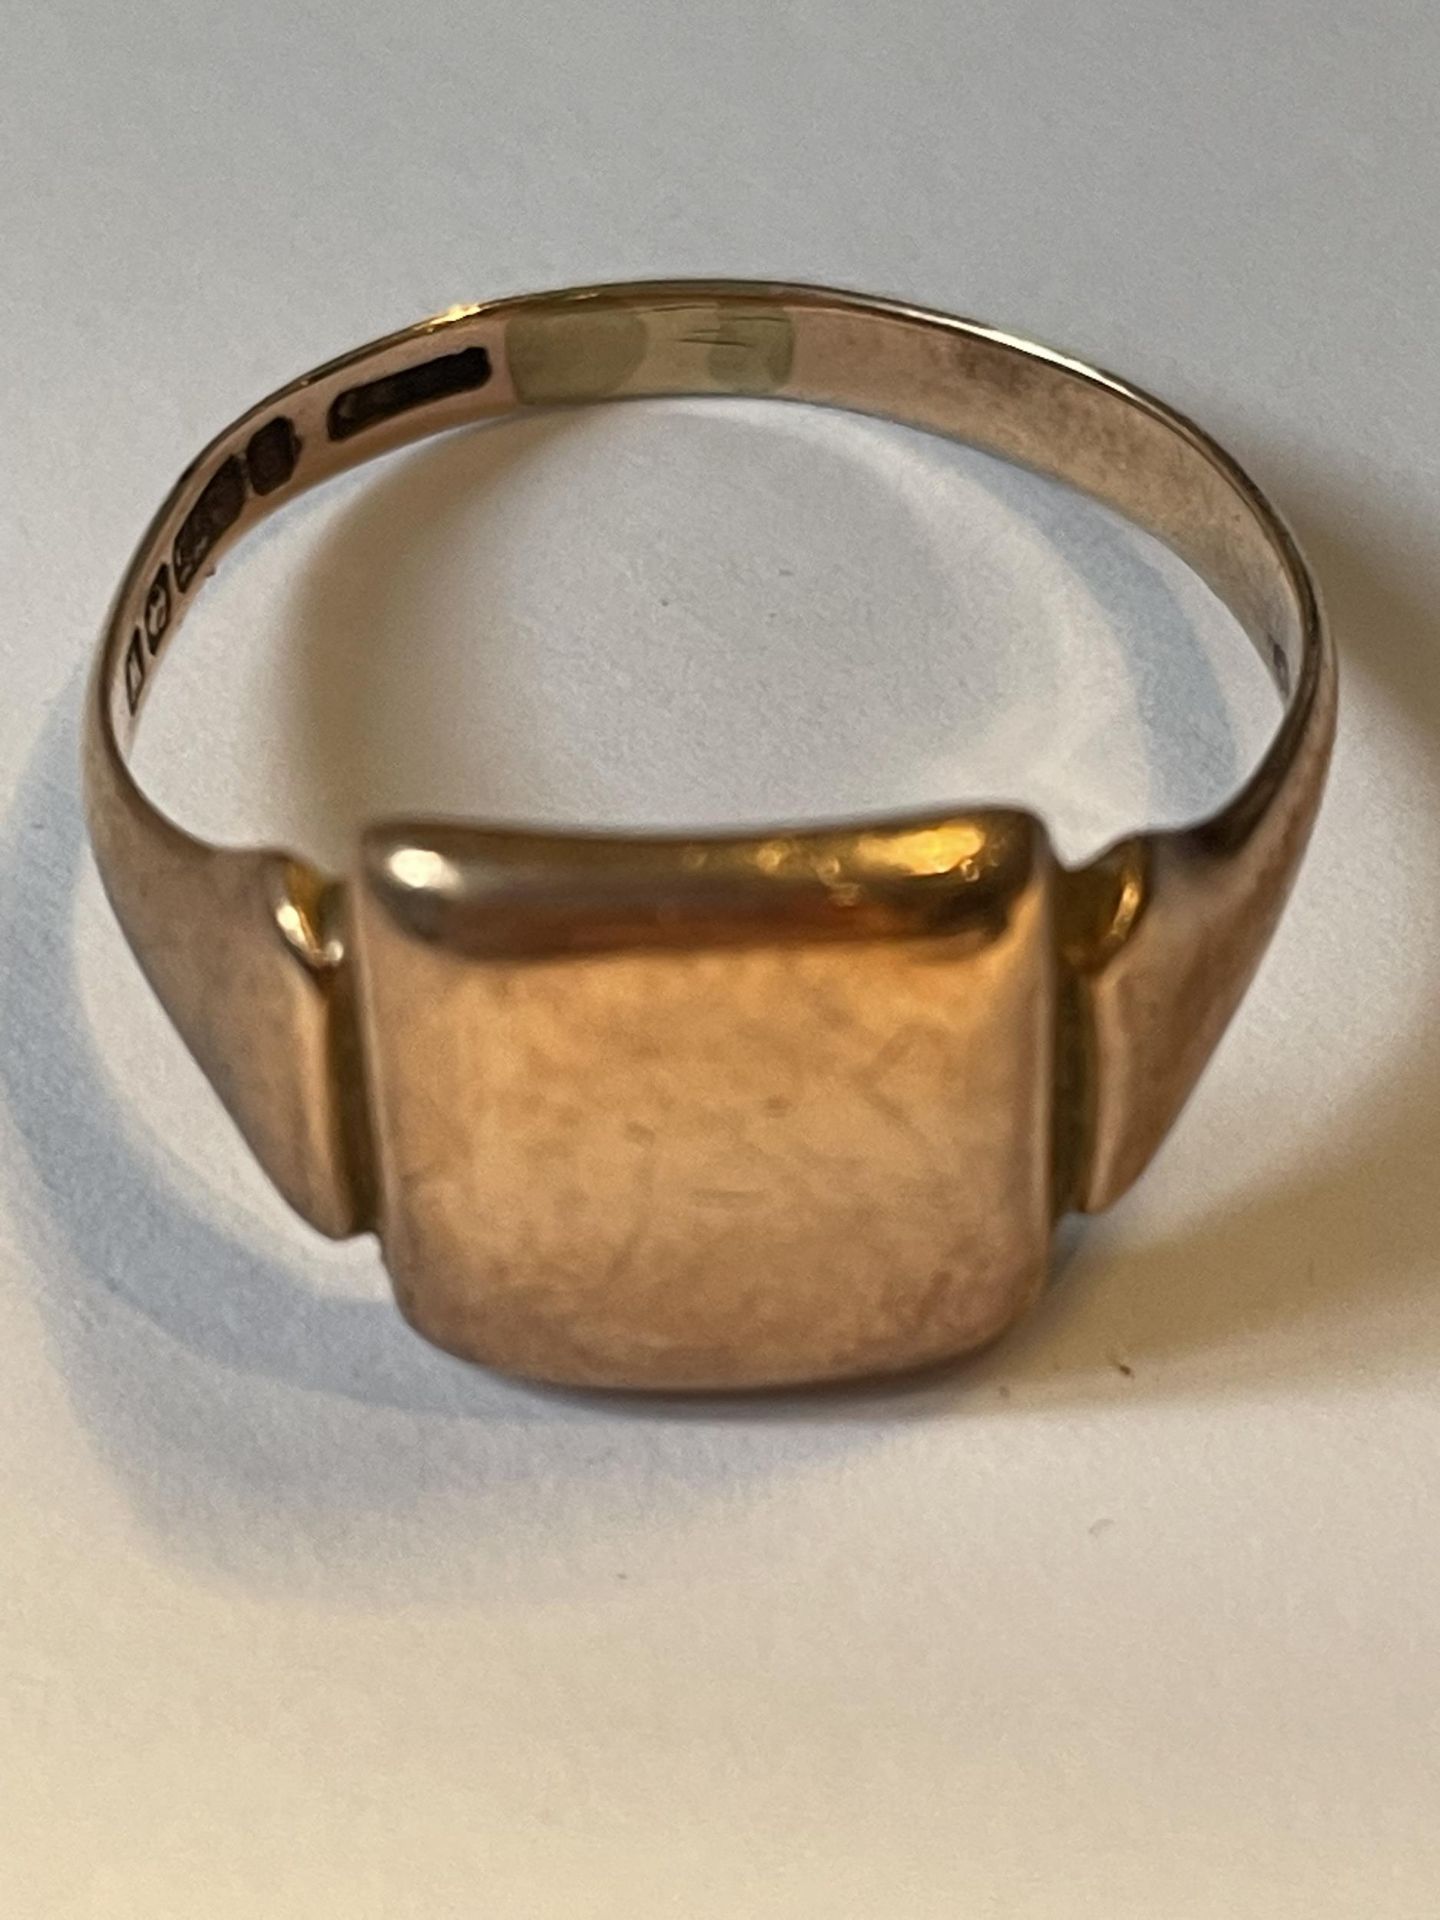 A 9 CARAT GOLD SIGNET RING MARKED 375 SIZE W GROSS WEIGHT 4.92 GRAMS